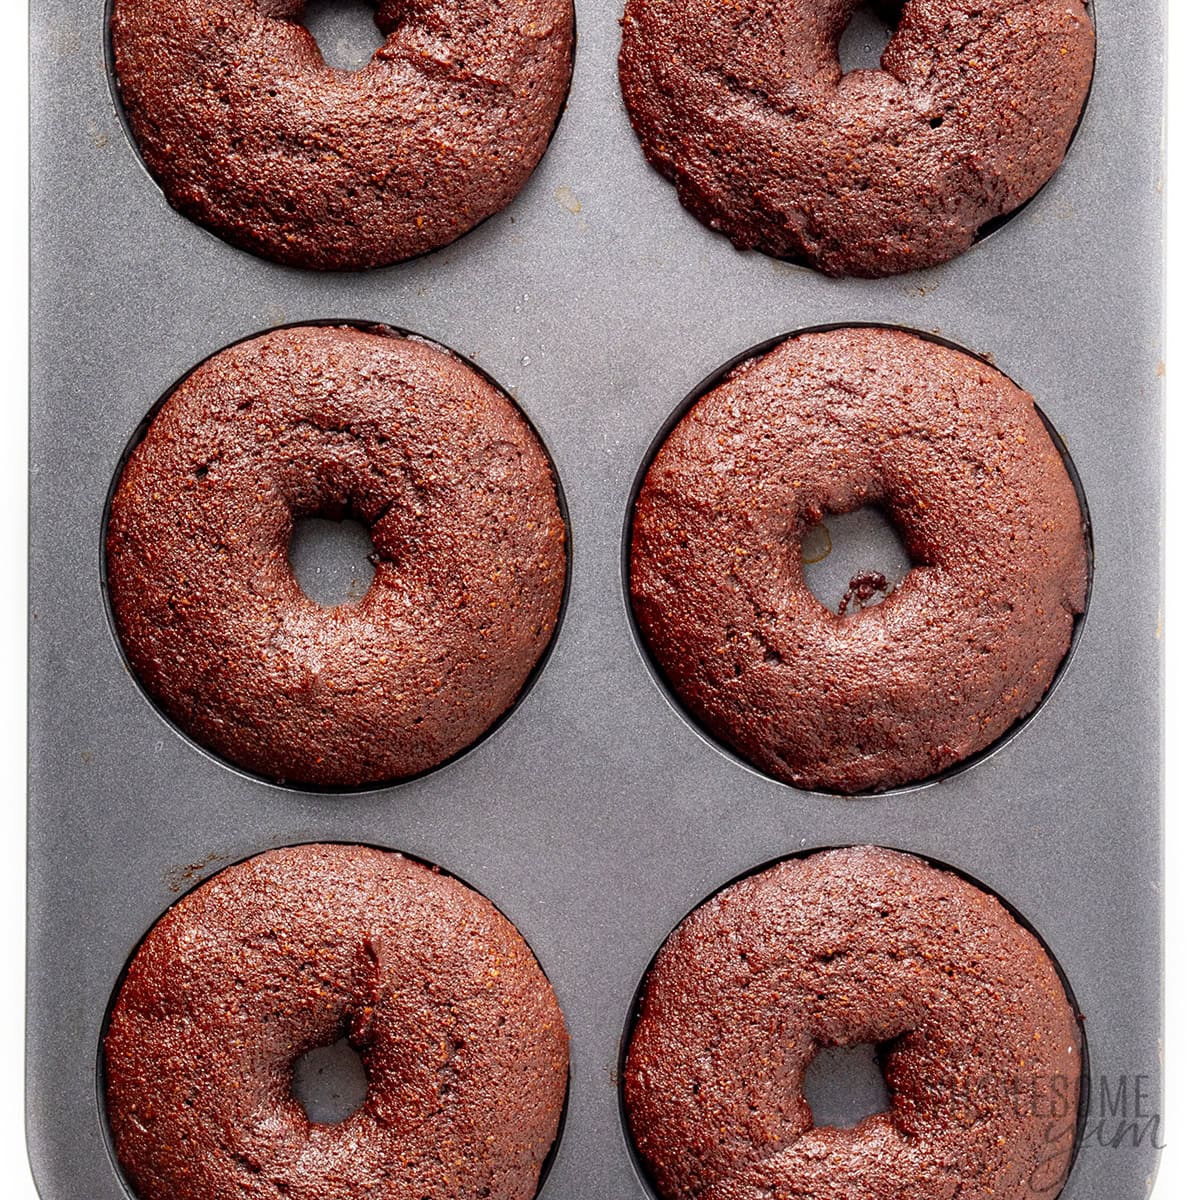 Baked protein donuts in the donut pan.